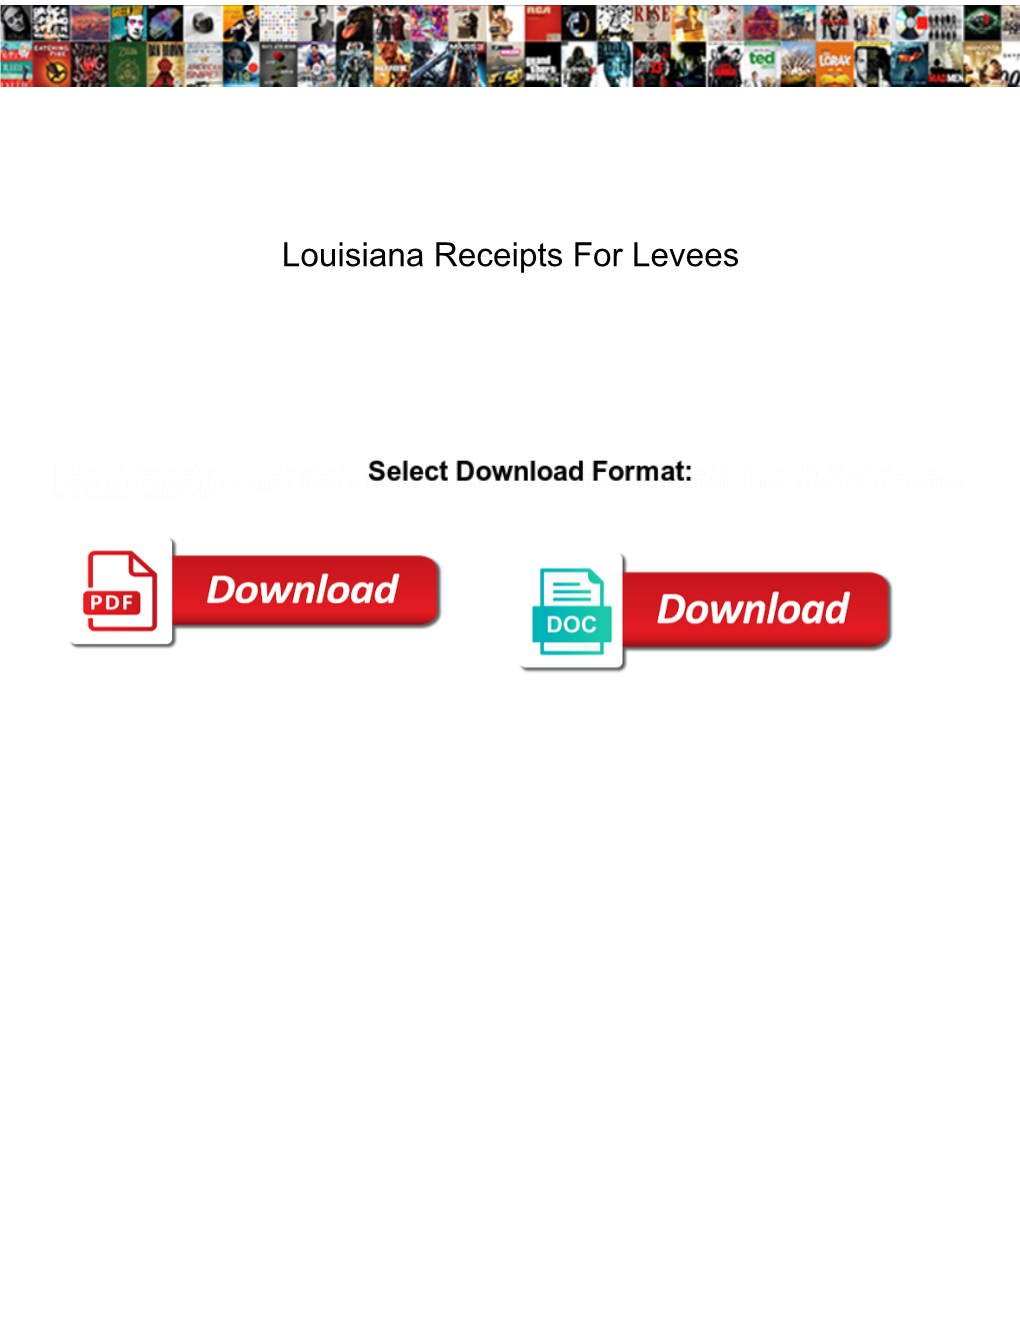 Louisiana Receipts for Levees